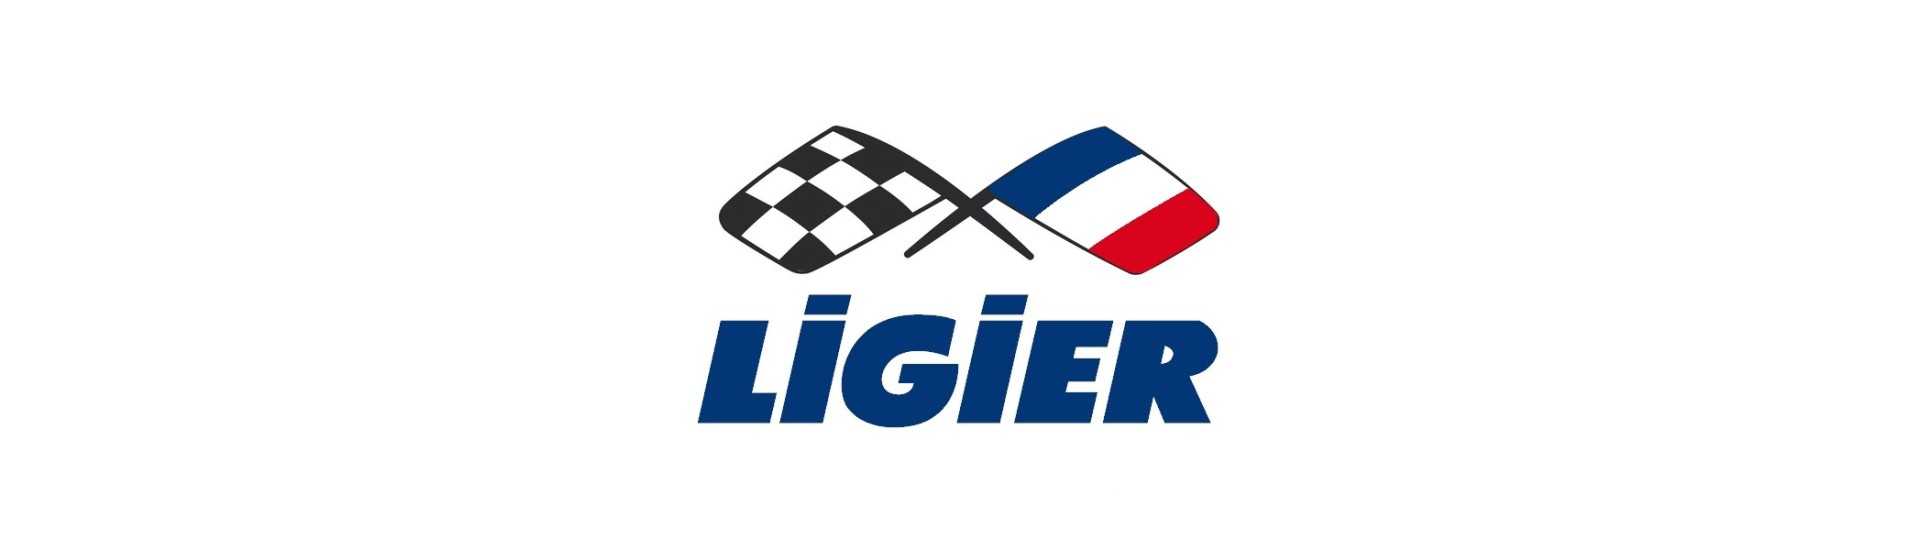 Best price counter for car without a permit Ligier